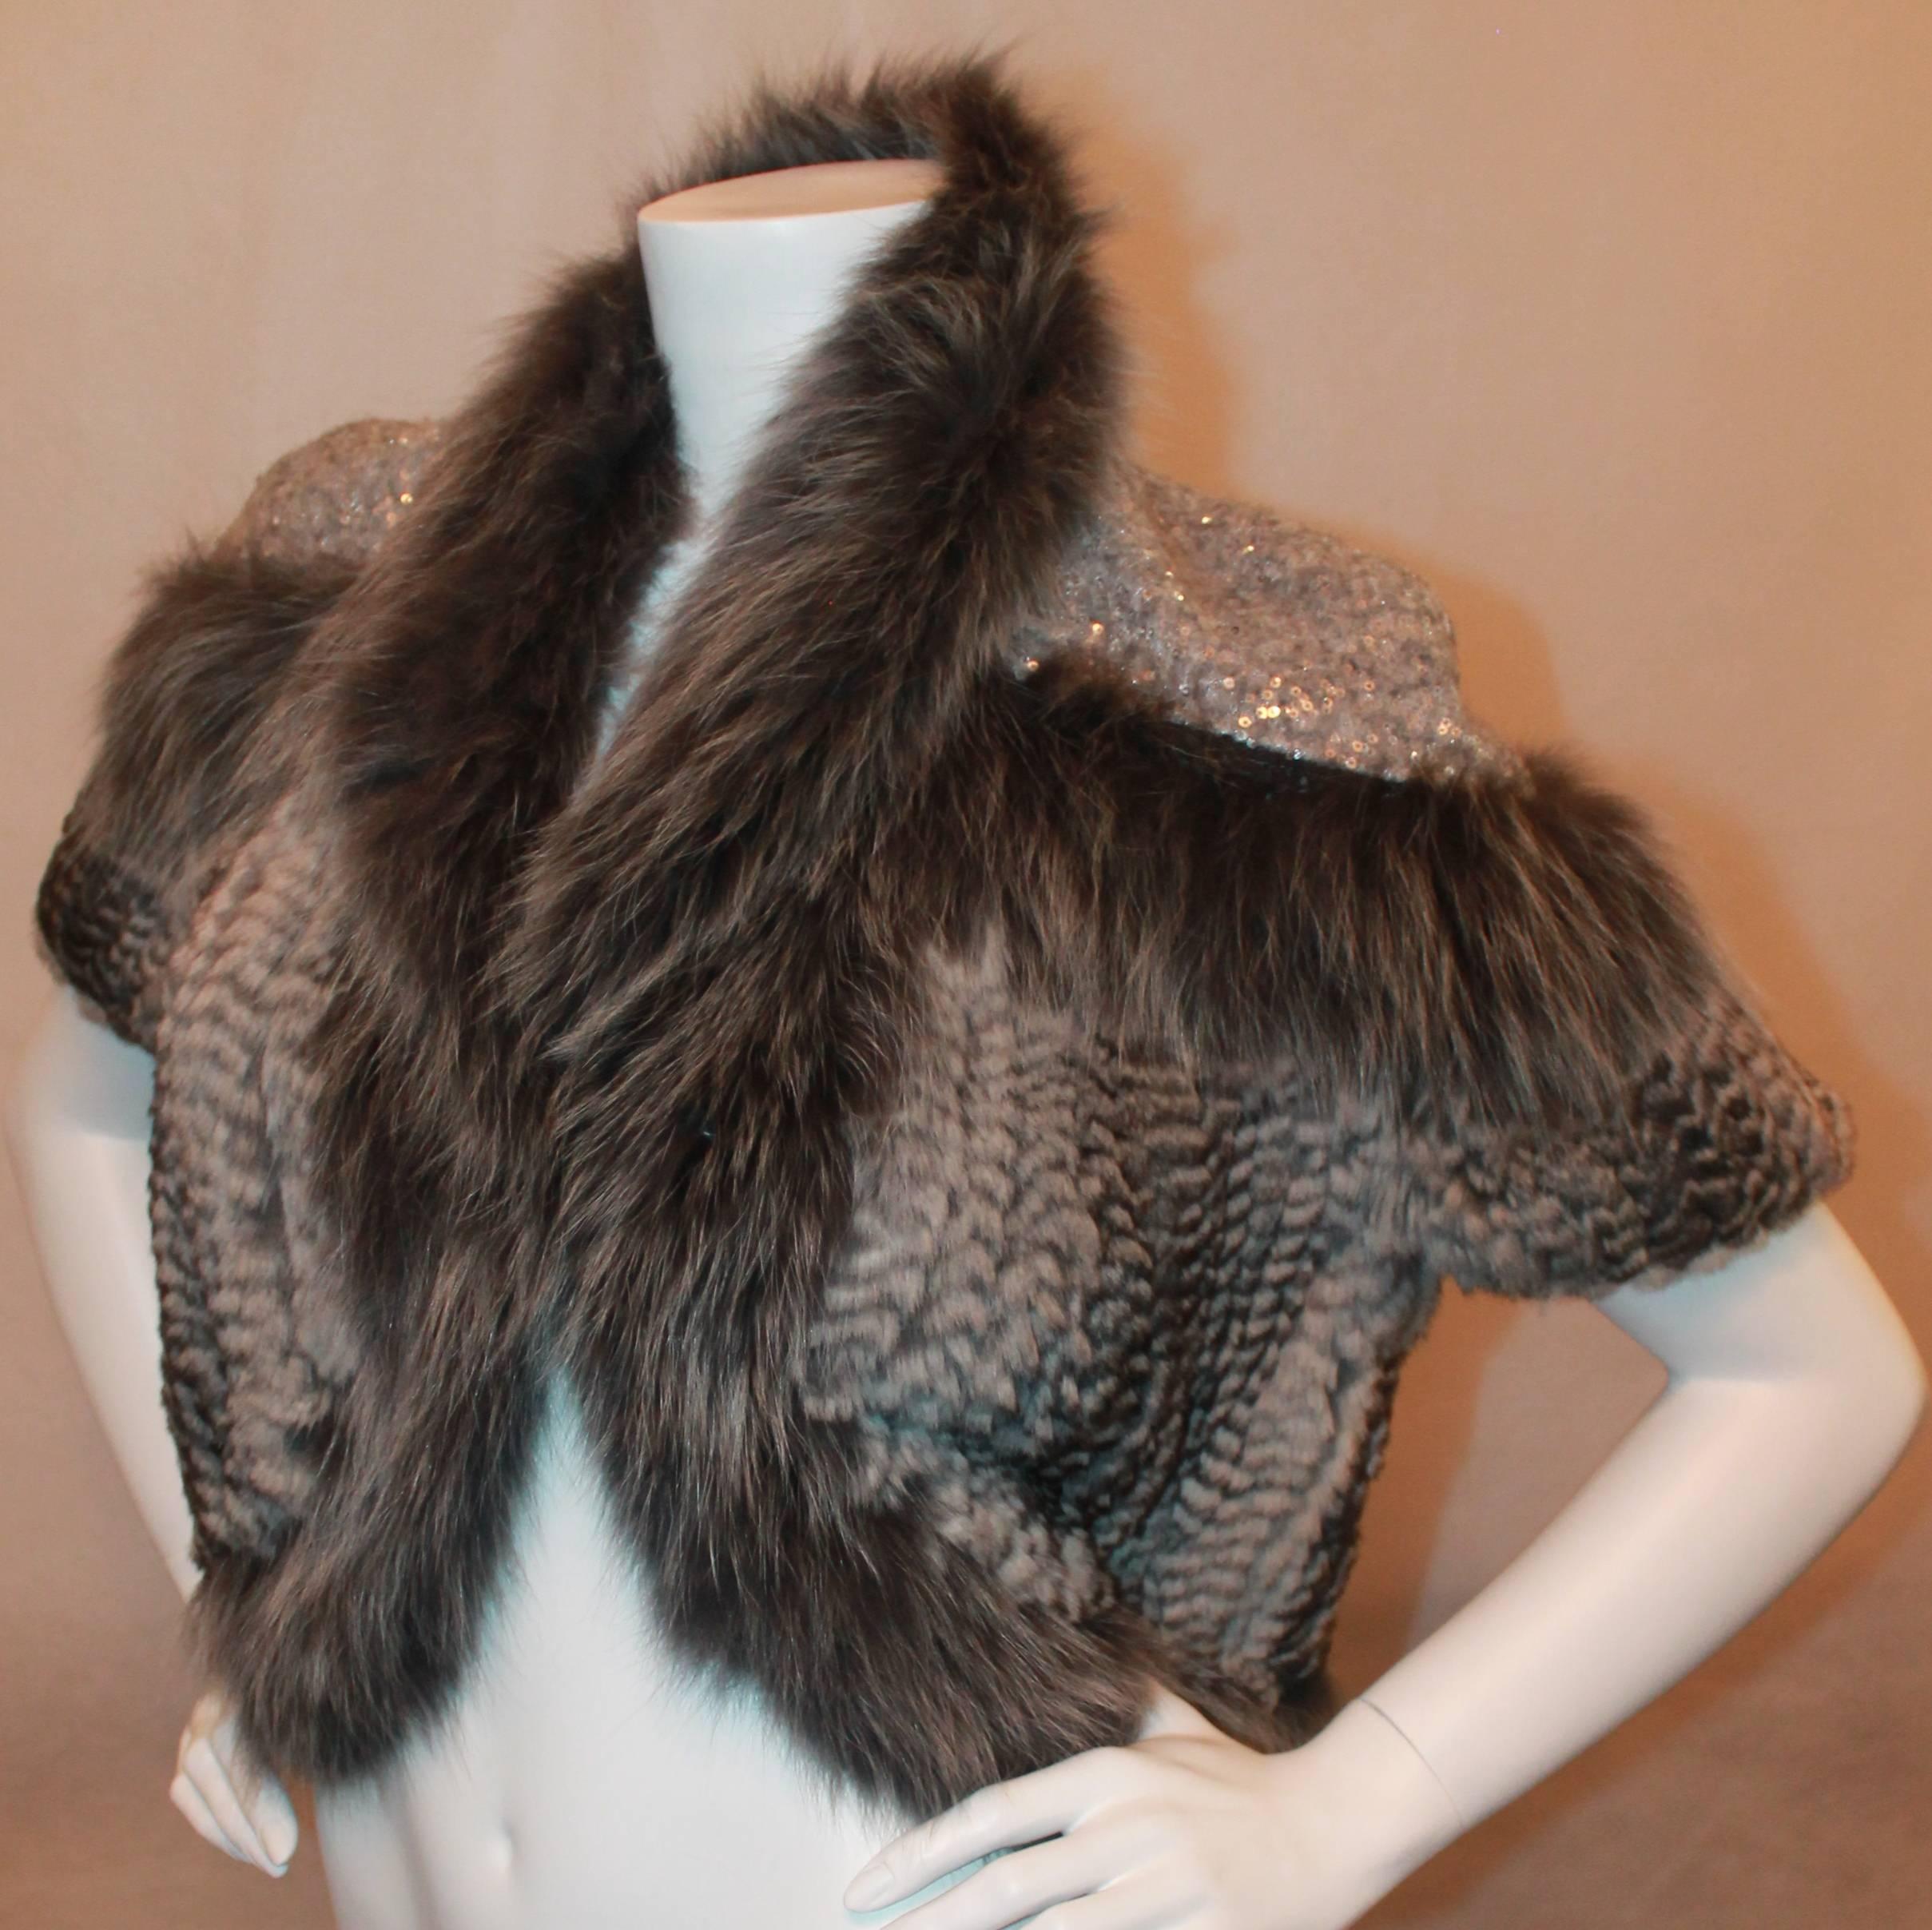 Hockley Grey Chinchilla and Fox Knitted Bolero w/ sequin shoulders-Size 44-NWT Retail price $5,200. This beautiful chinchilla fur jacket has short sleeve, fox trim and sequin detail on shoulders. It is new and never worn.

Measurements:
Bust